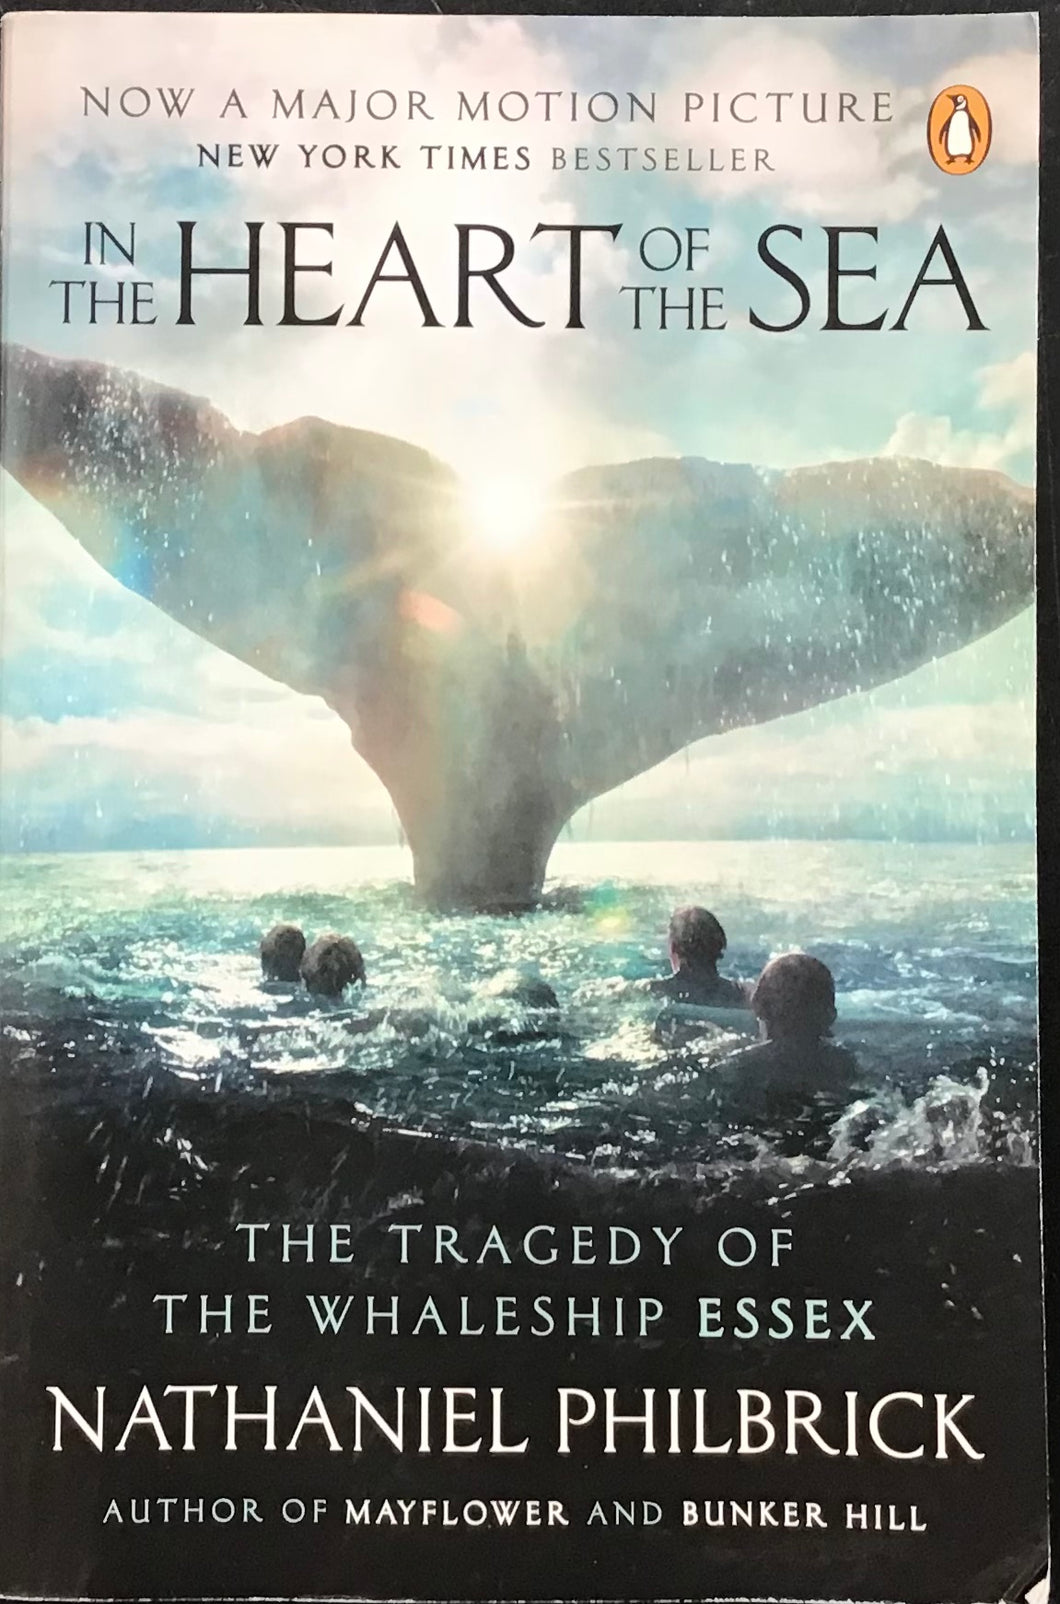 In The Heart Of The sea, Nathaniel Philbrick